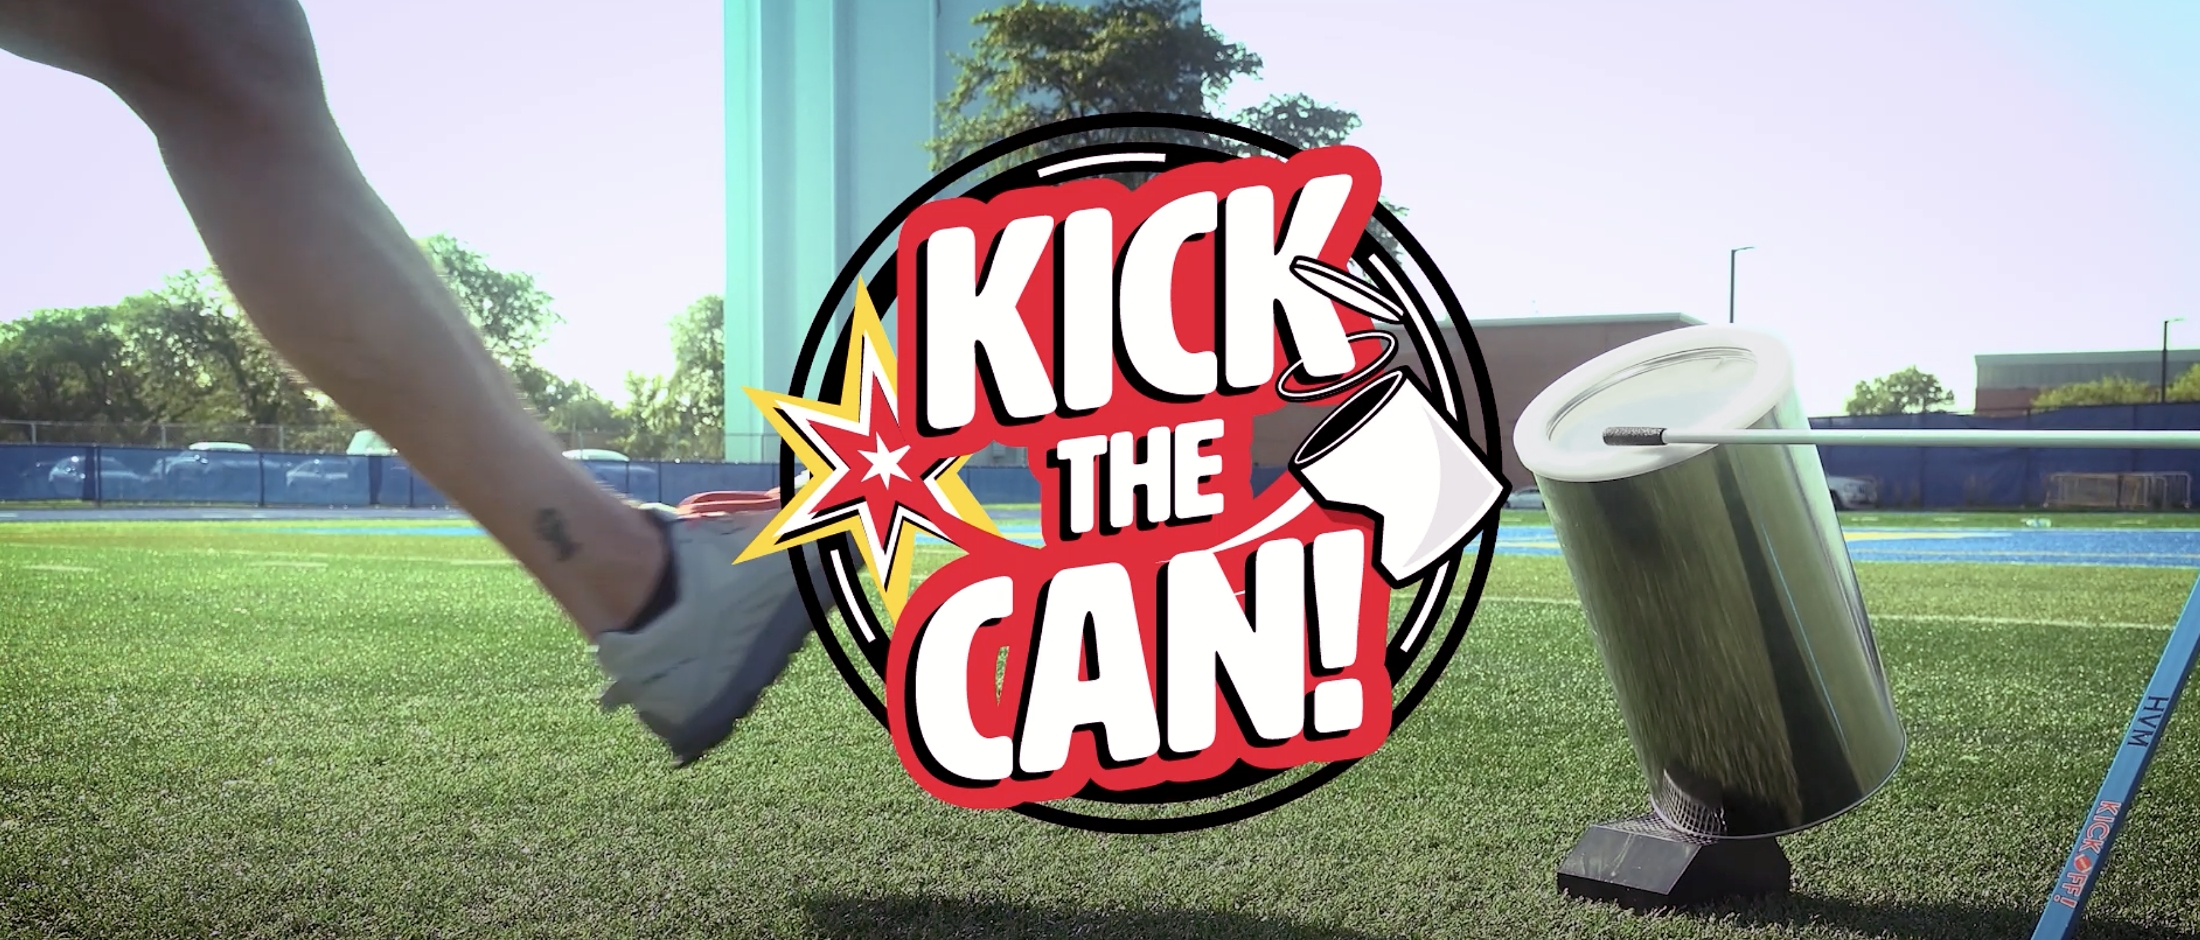 Image from Capsuloc “Kick The Can” video.